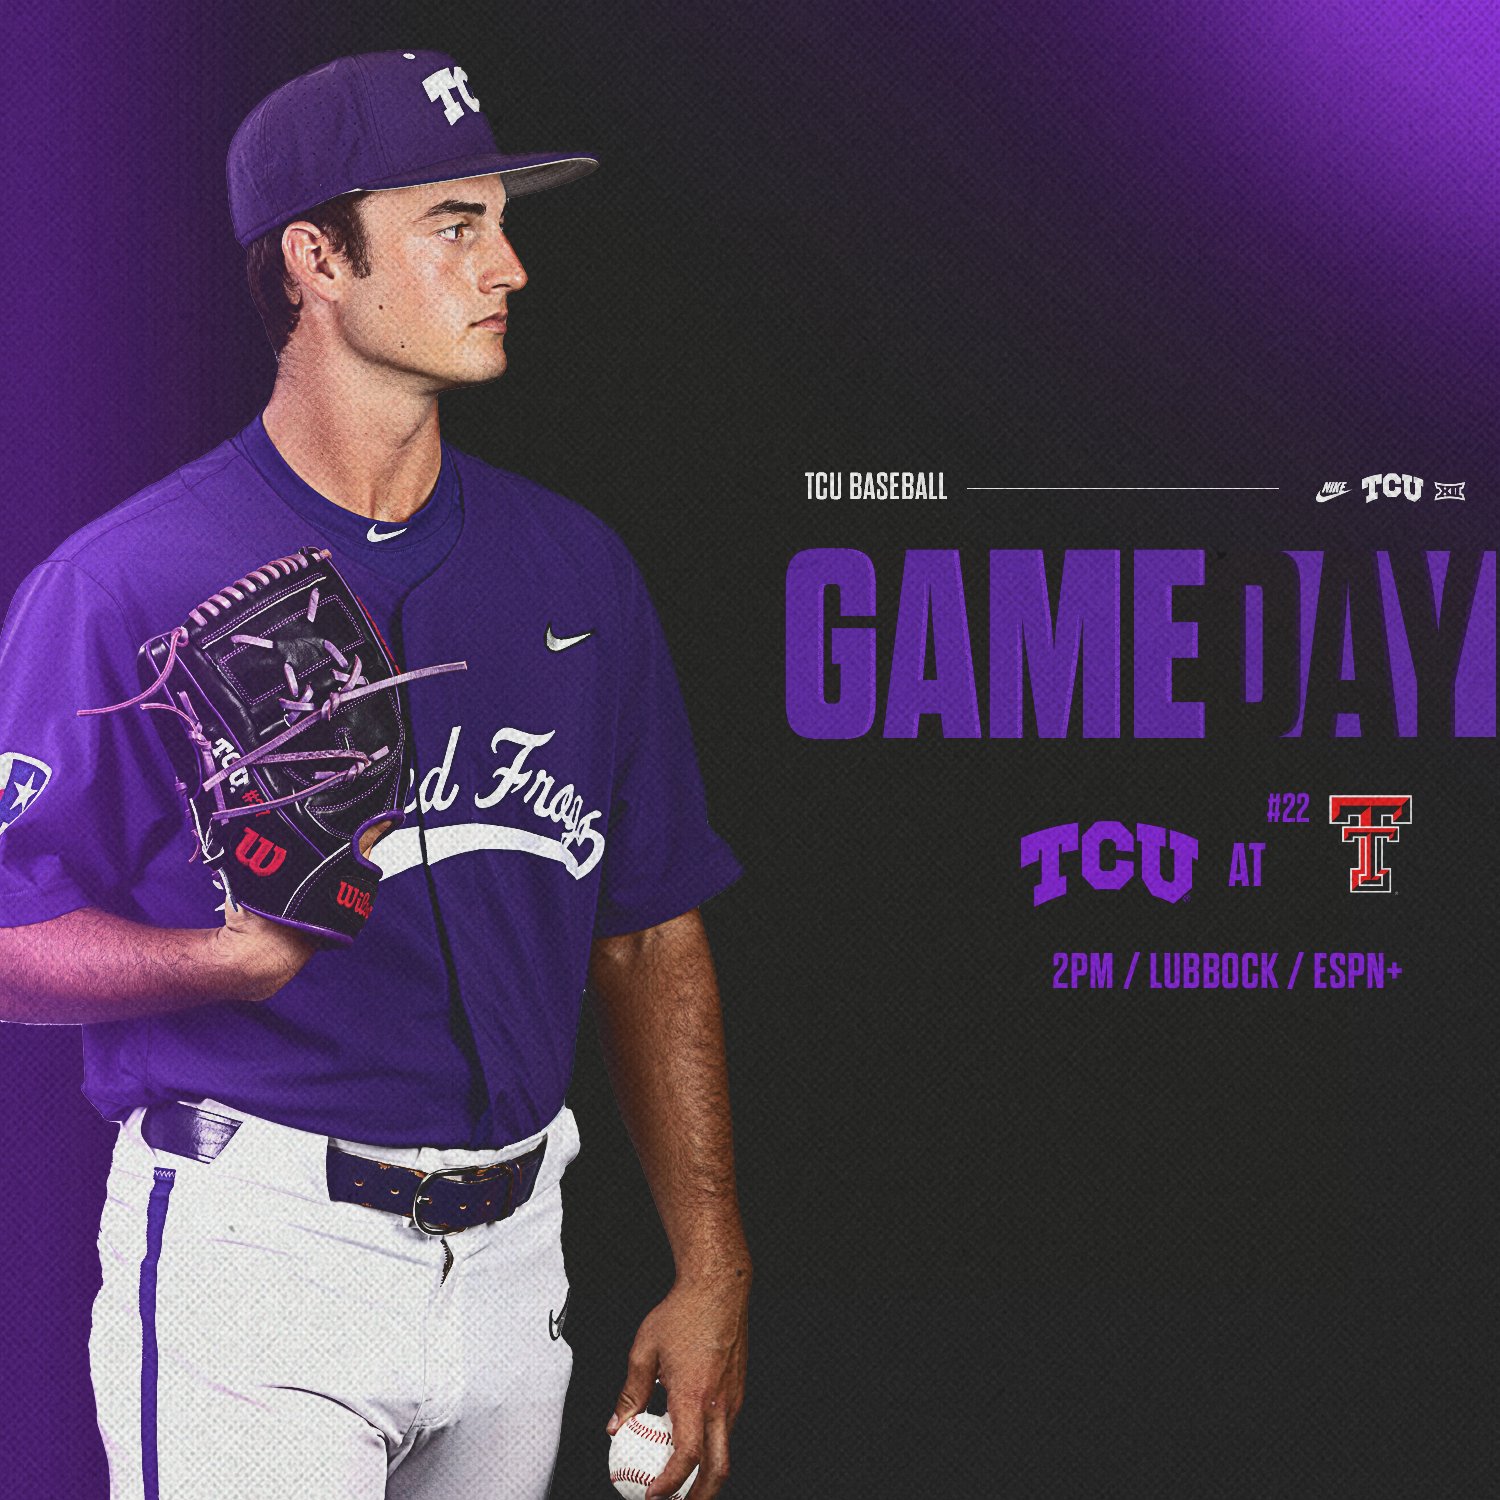 TCU Baseball on Twitter: Series on the line today in Lubbock